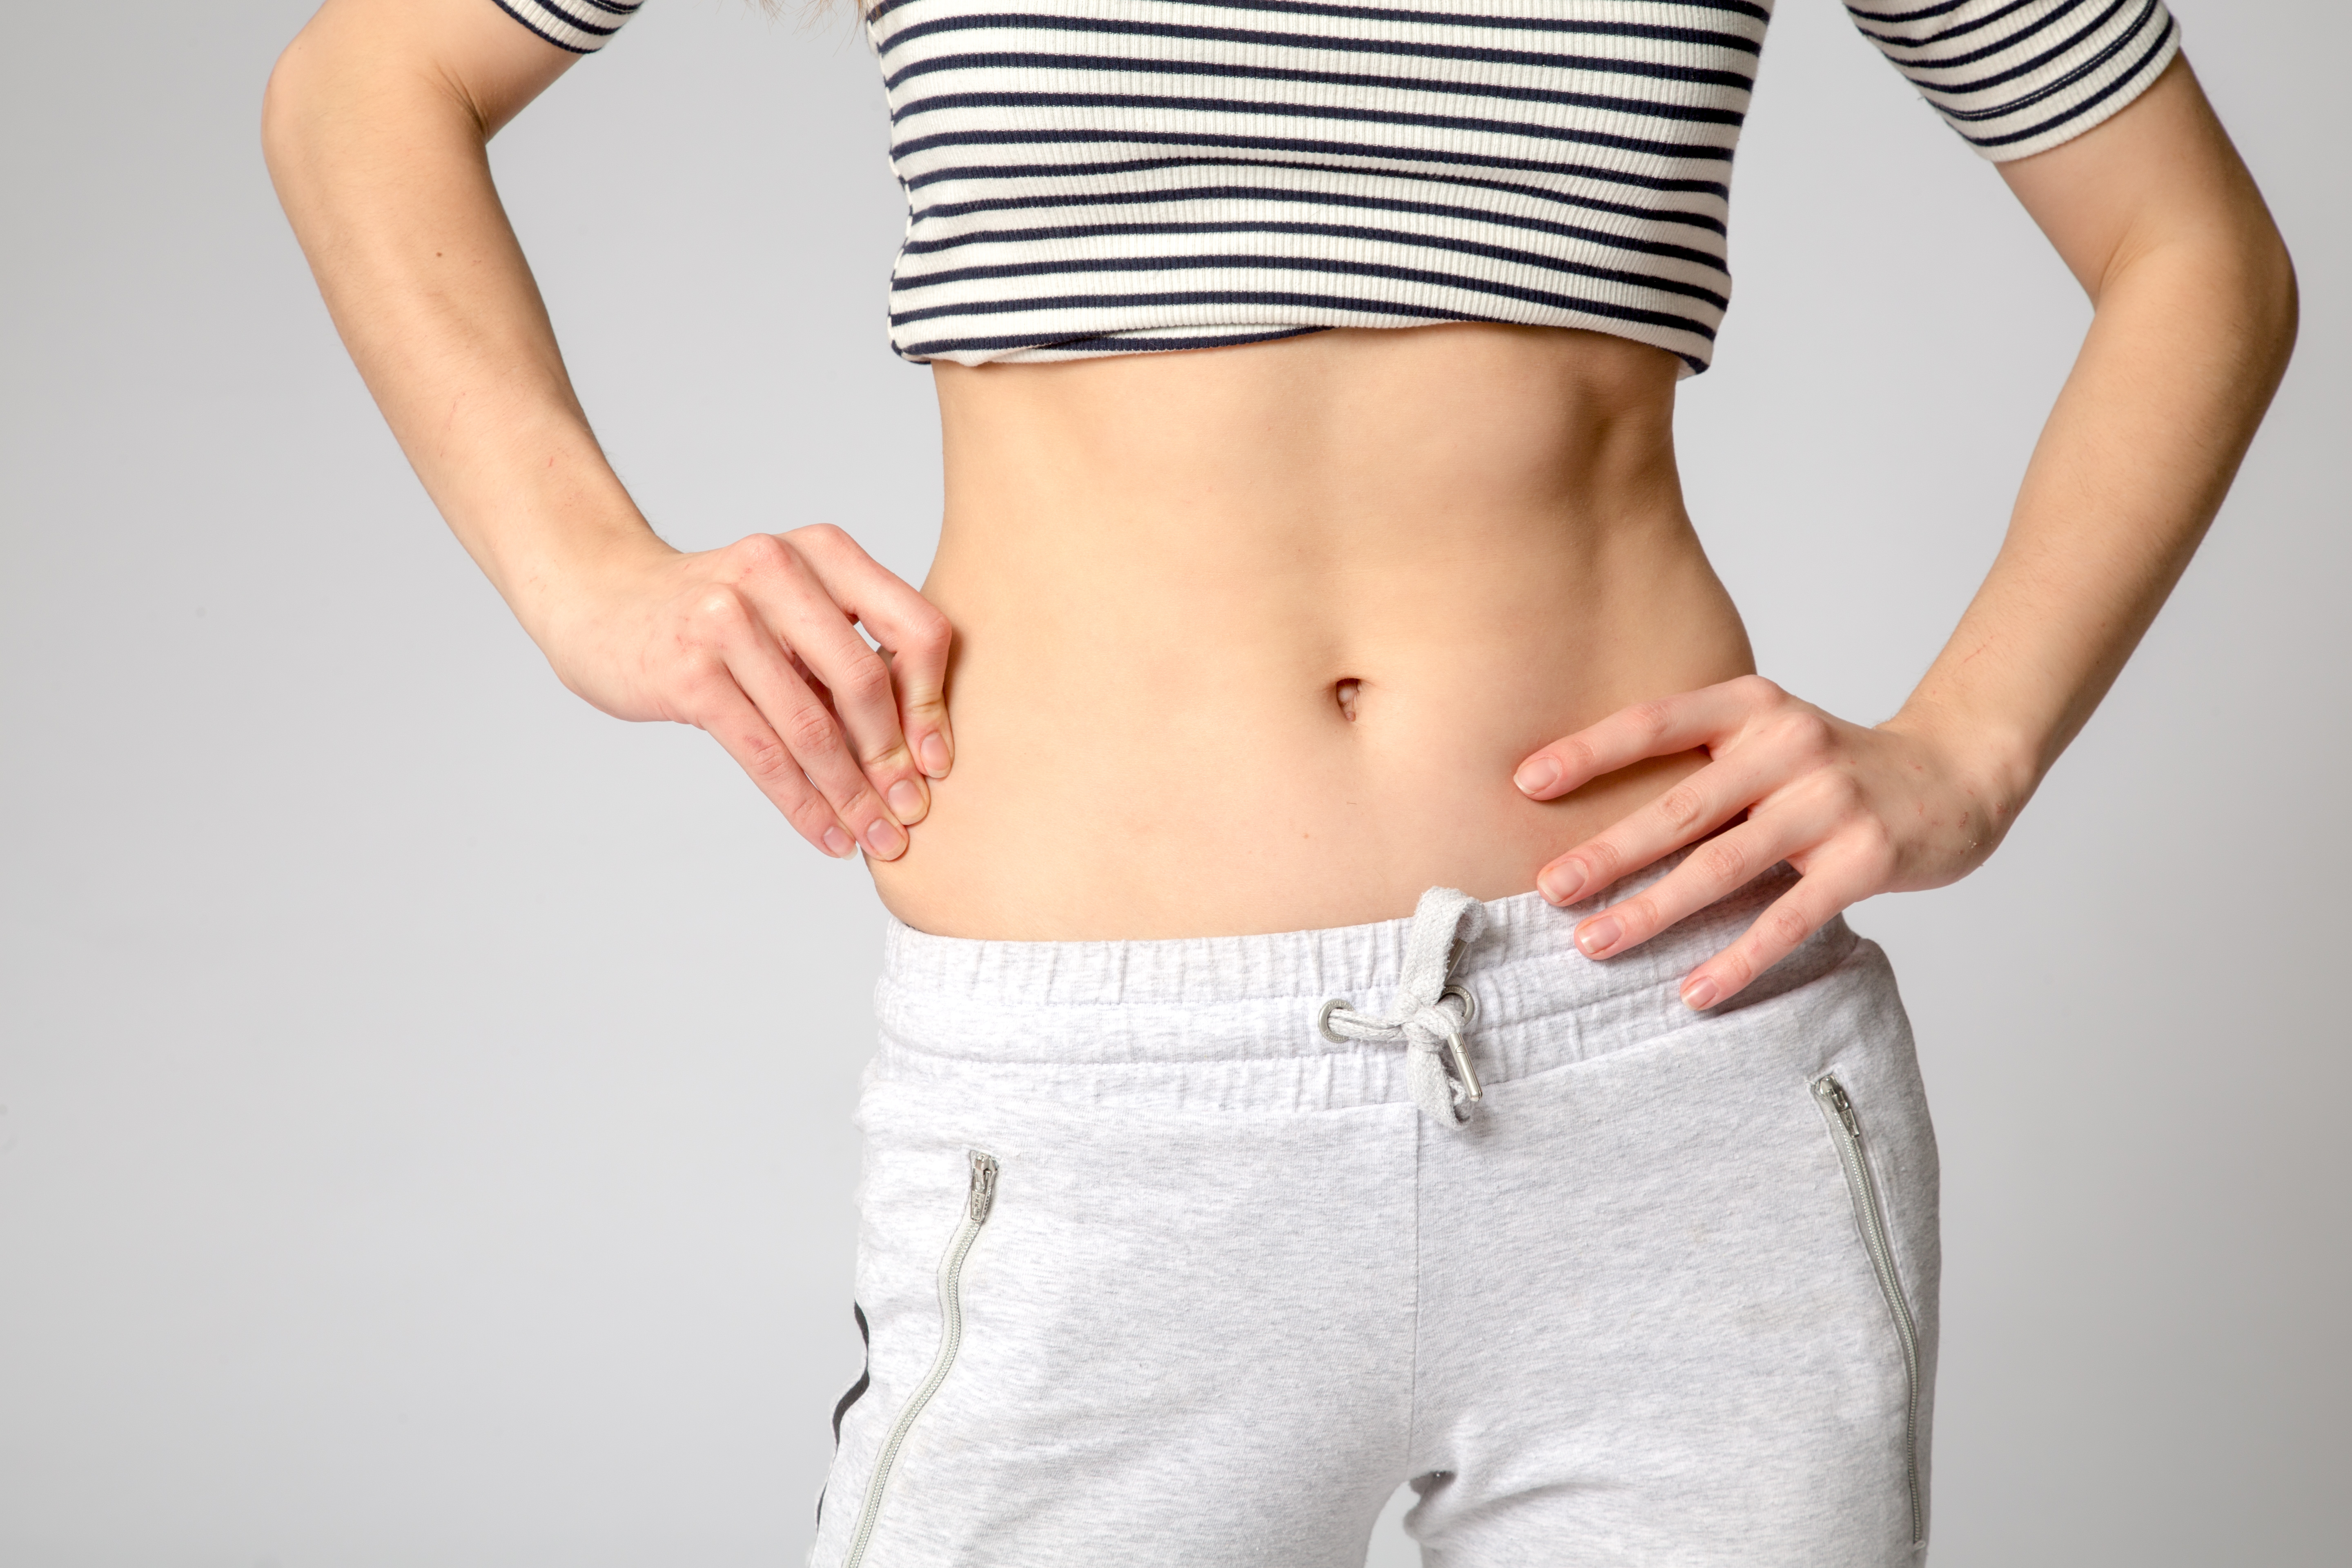 Fat Freezing - What Results to Expect Through Coolsculpting